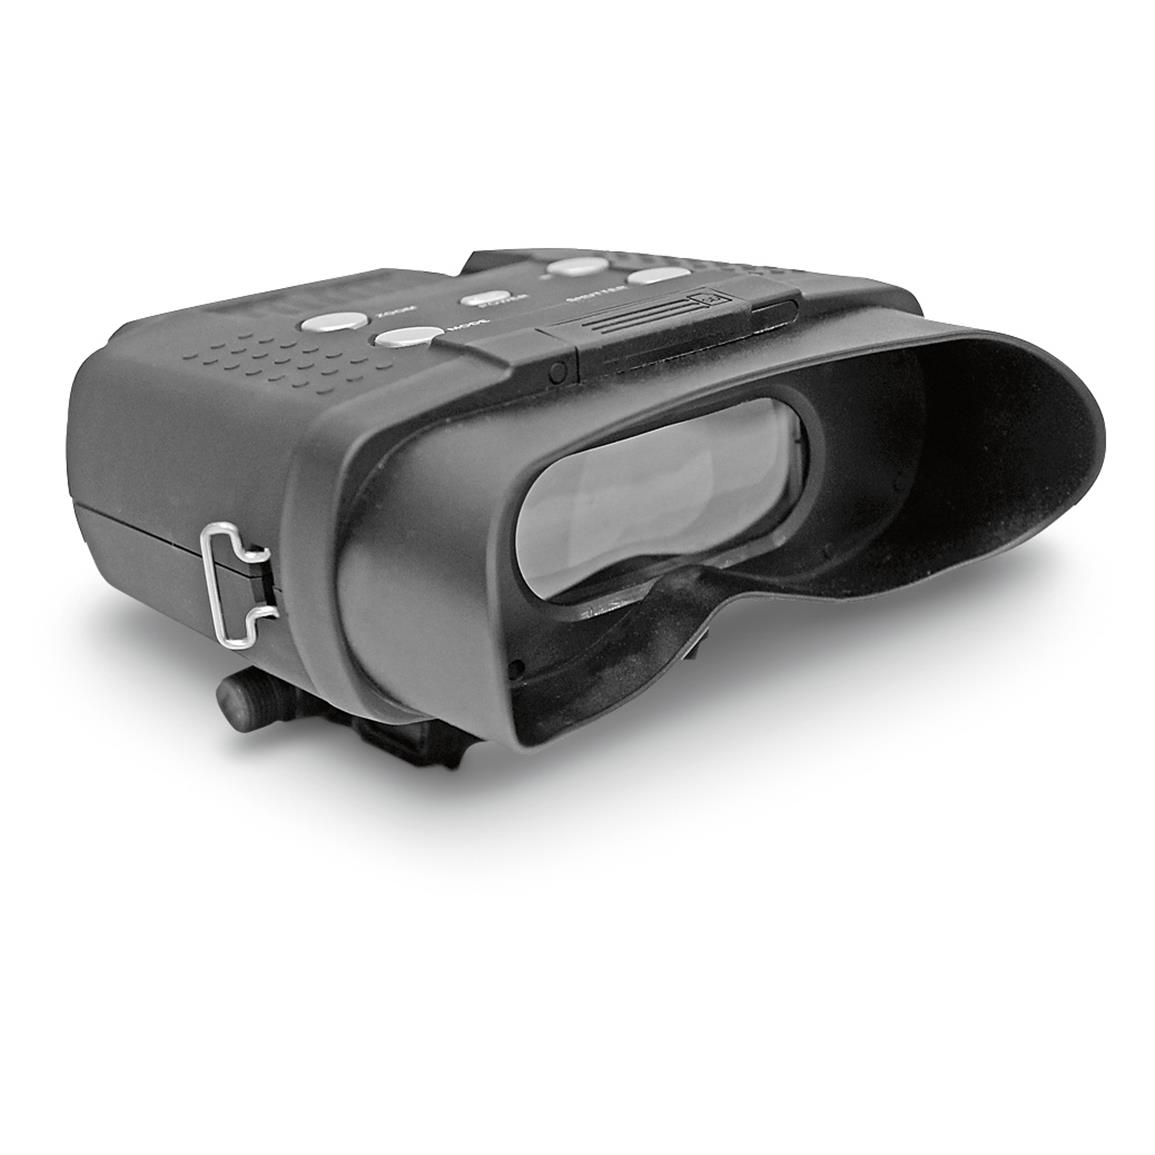 Effective night vision at an affordable price